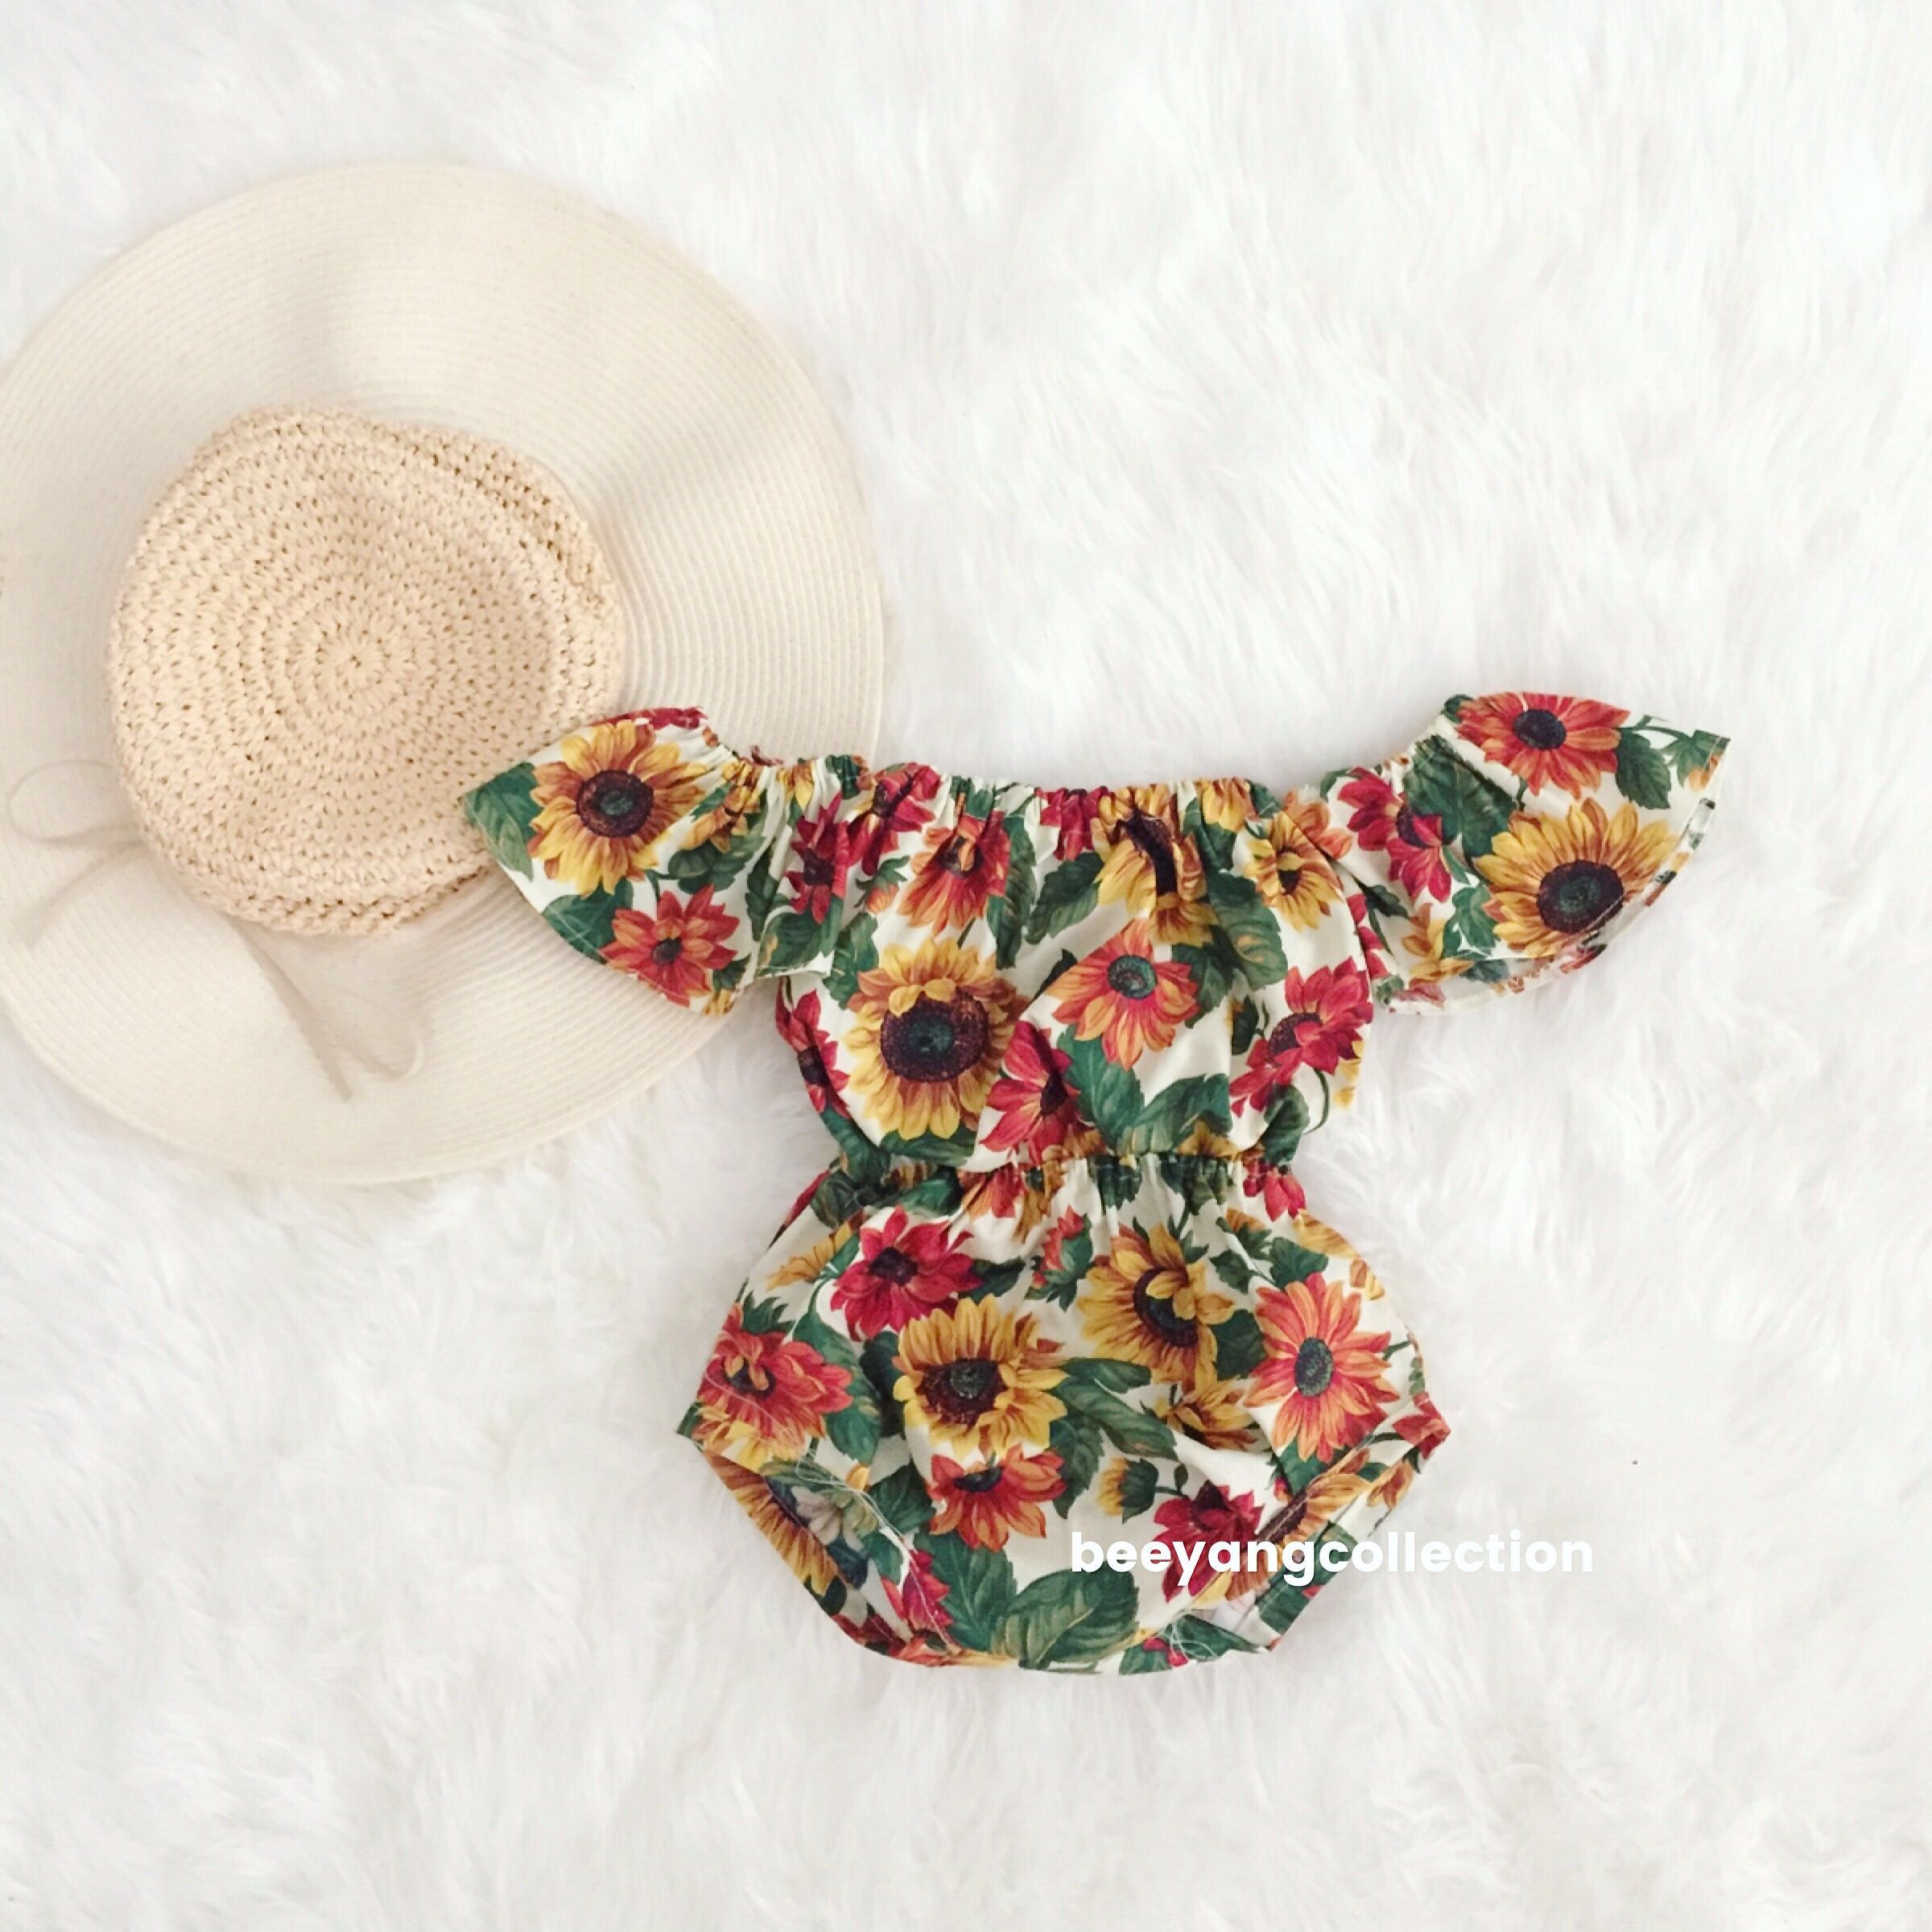 Baby Girl Romper, baby girl clothes, Baby Romper, Photography prop, Baby Bodysuit, Vintage Boho romper, Birthday outfit,